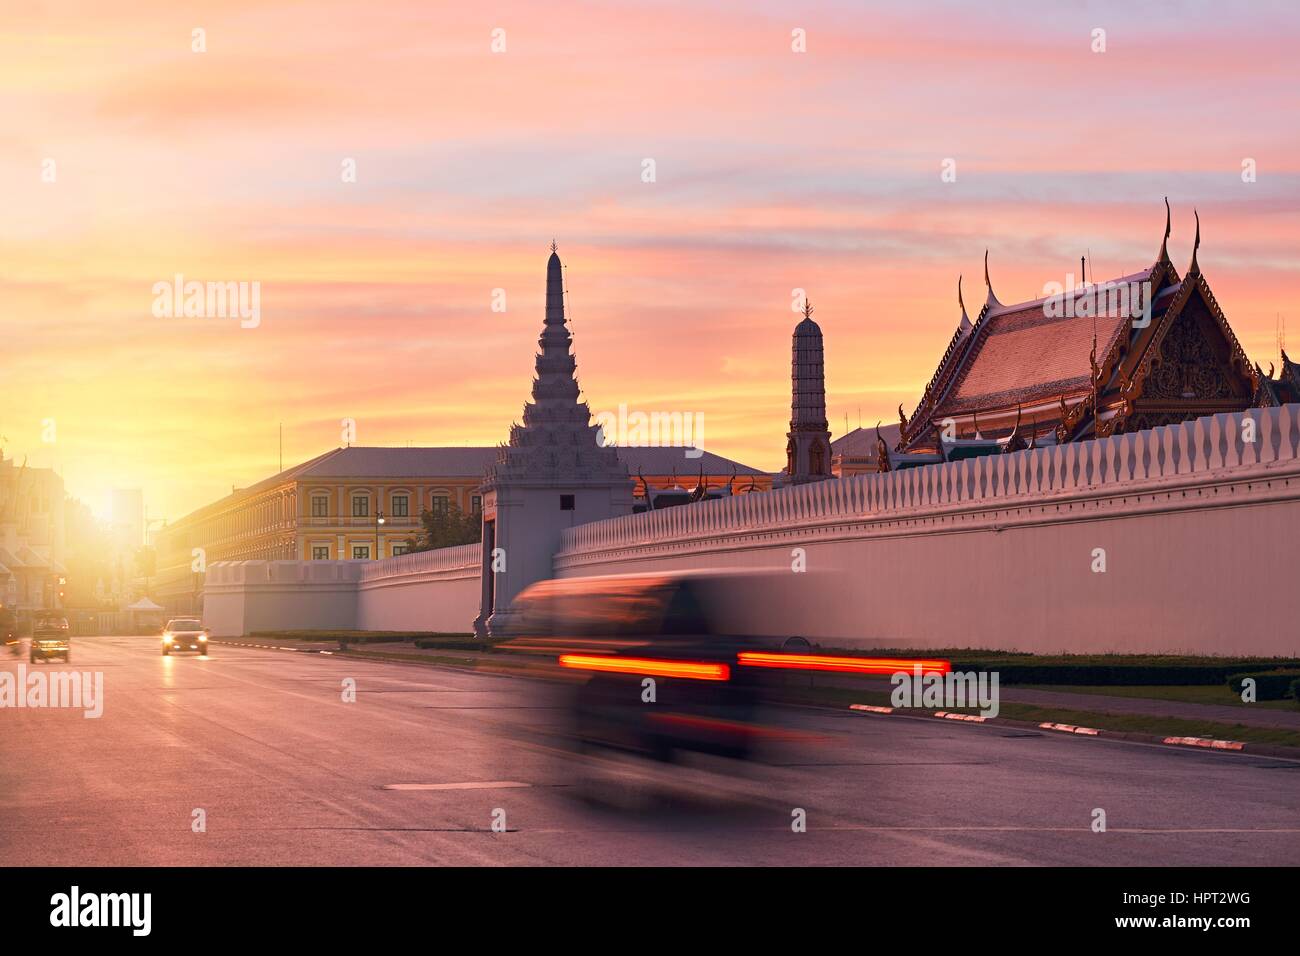 Tuk Tuk taxi in blurred motion in front of Grand Palace during beautiful sunrise  Bangkok, Thailand Stock Photo